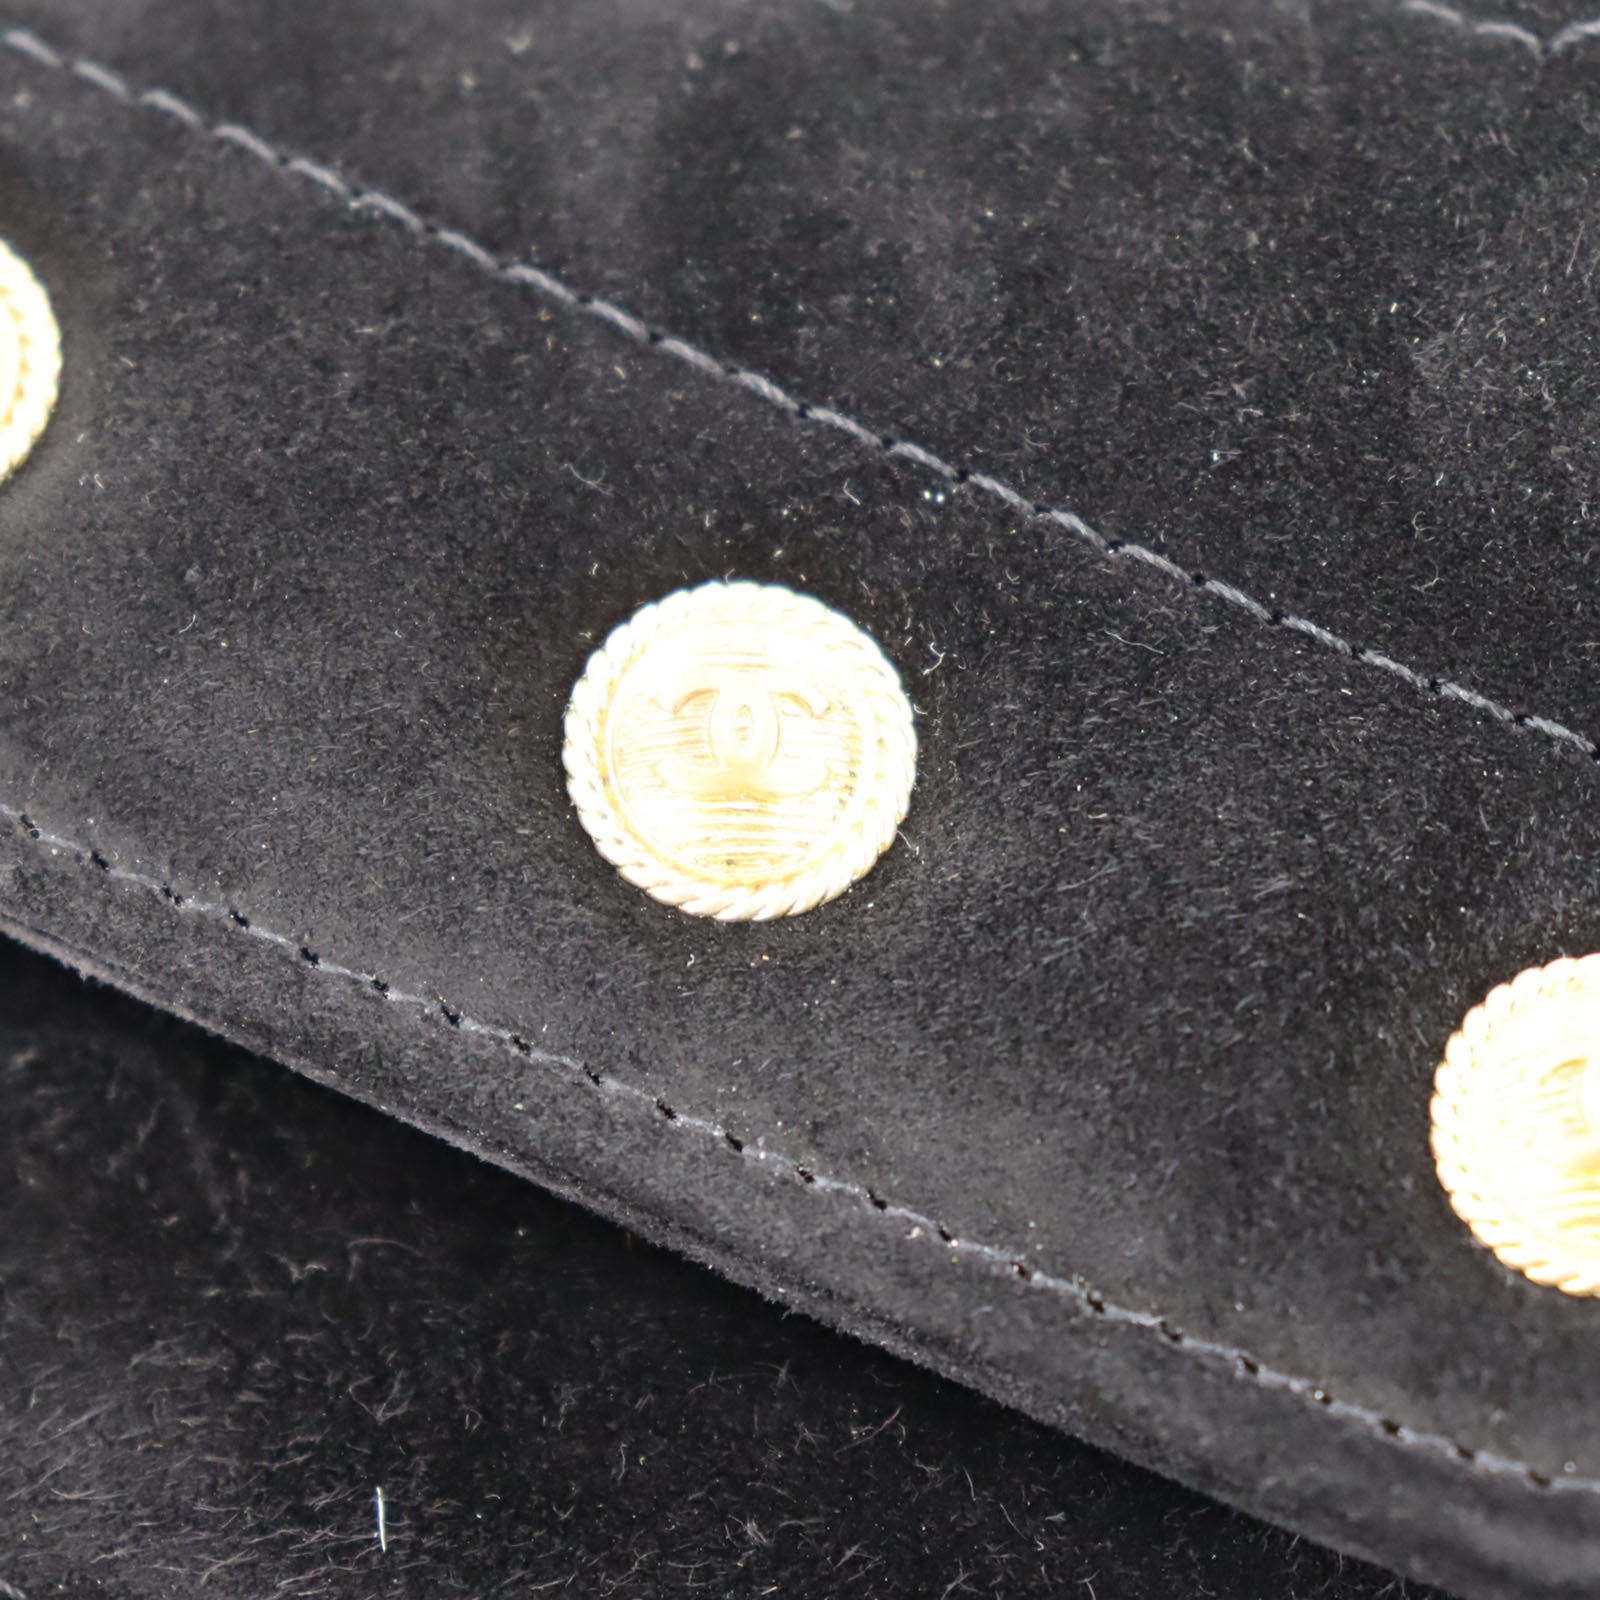 Vintage black and gold Chanel authentic buttons